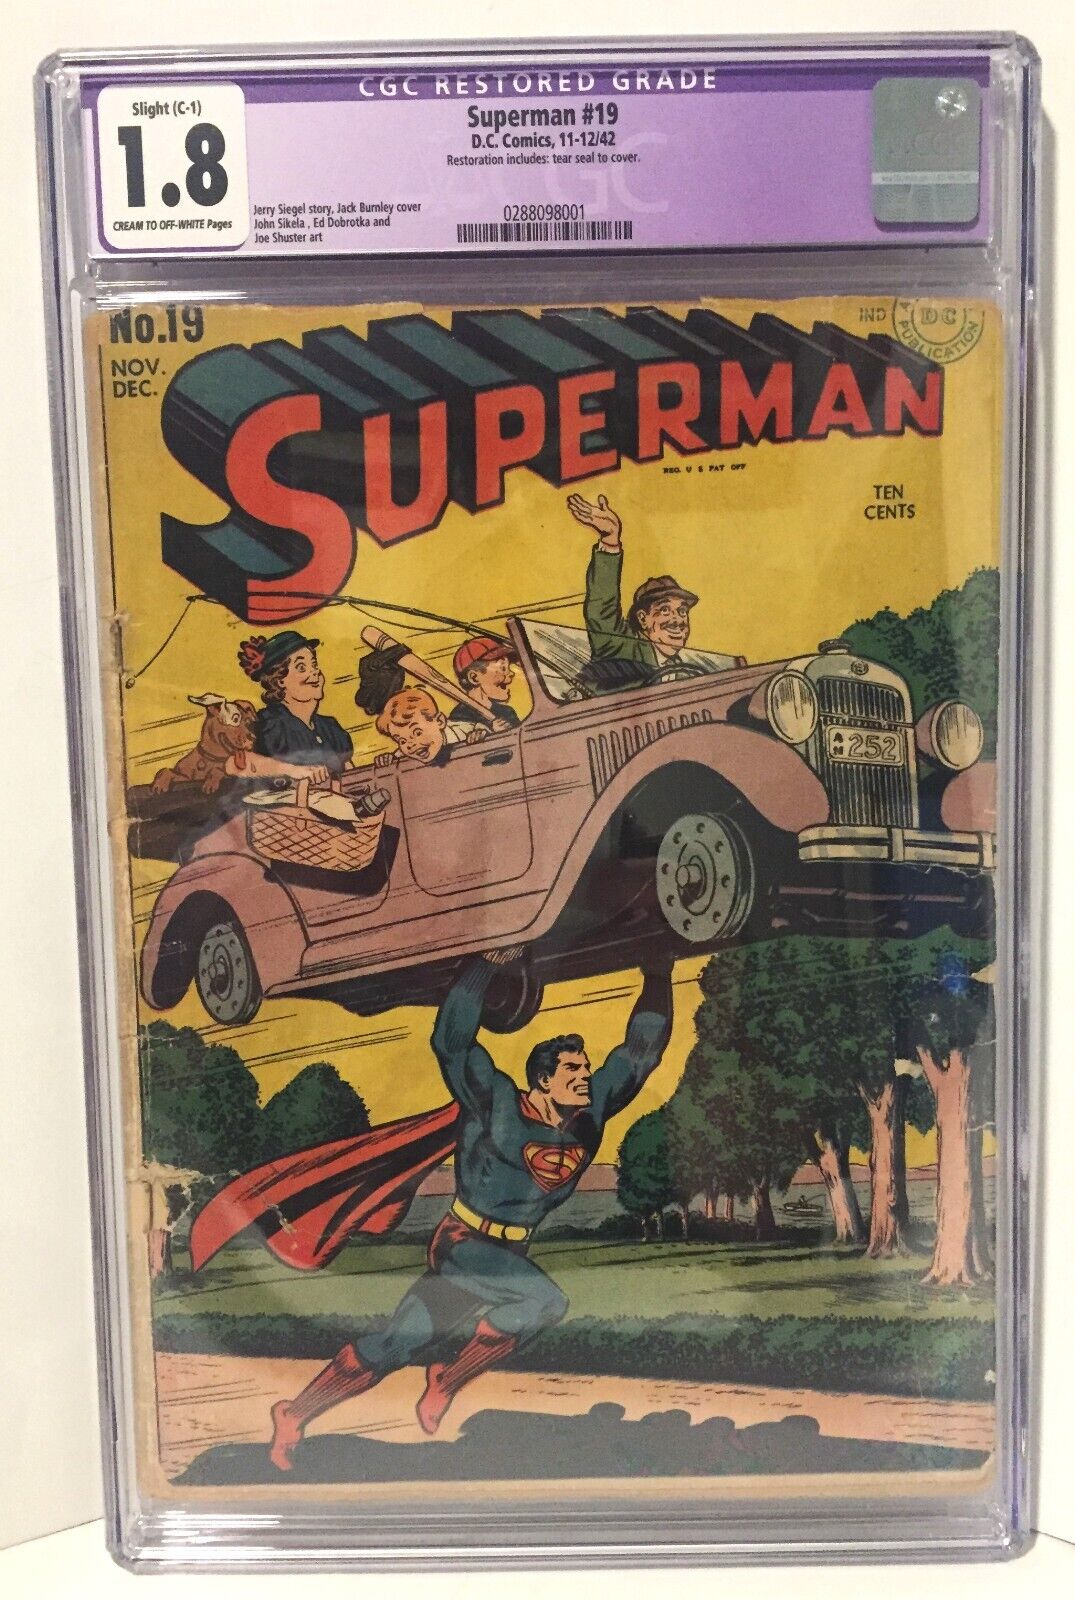 Superman #19  CGC 1.8 Restored   DC 1942  Early Golden Age